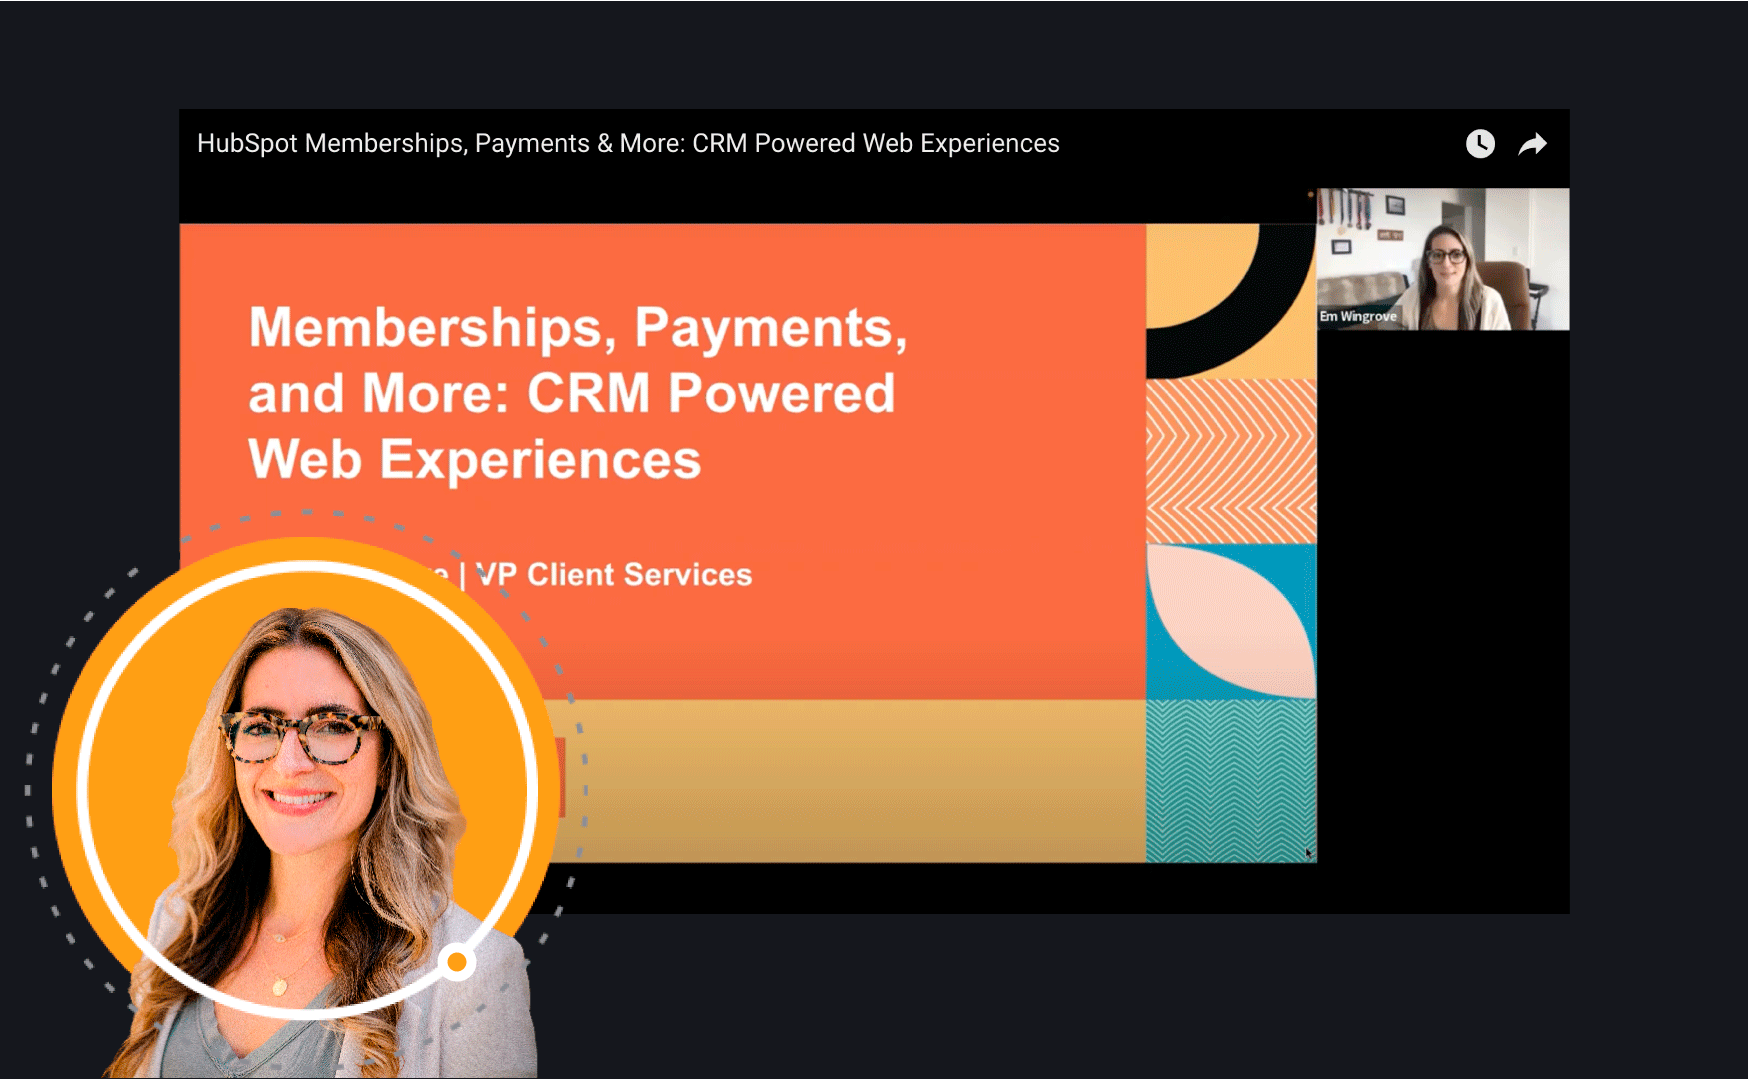 HubSpot Memberships, Payments & More: CRM Powered Web Experiences